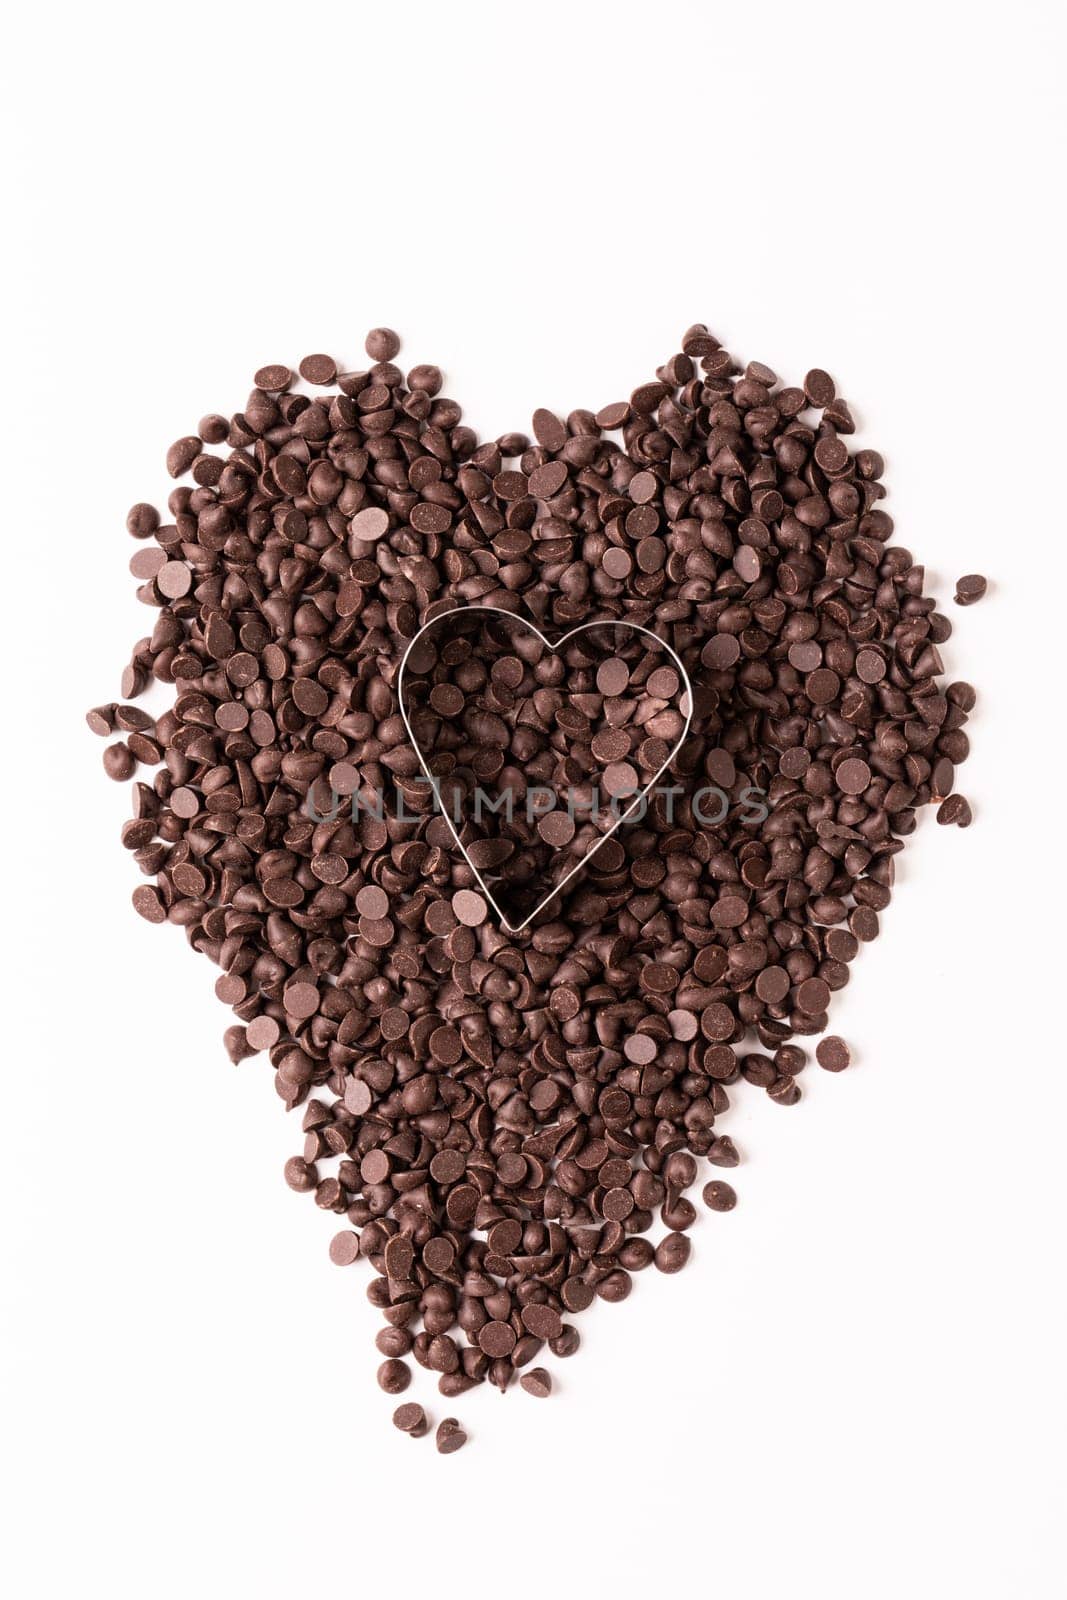 Overhead view of heart shape pastry cutter over chocolate chips on white background. unaltered, sweet food and unhealthy eating concept.